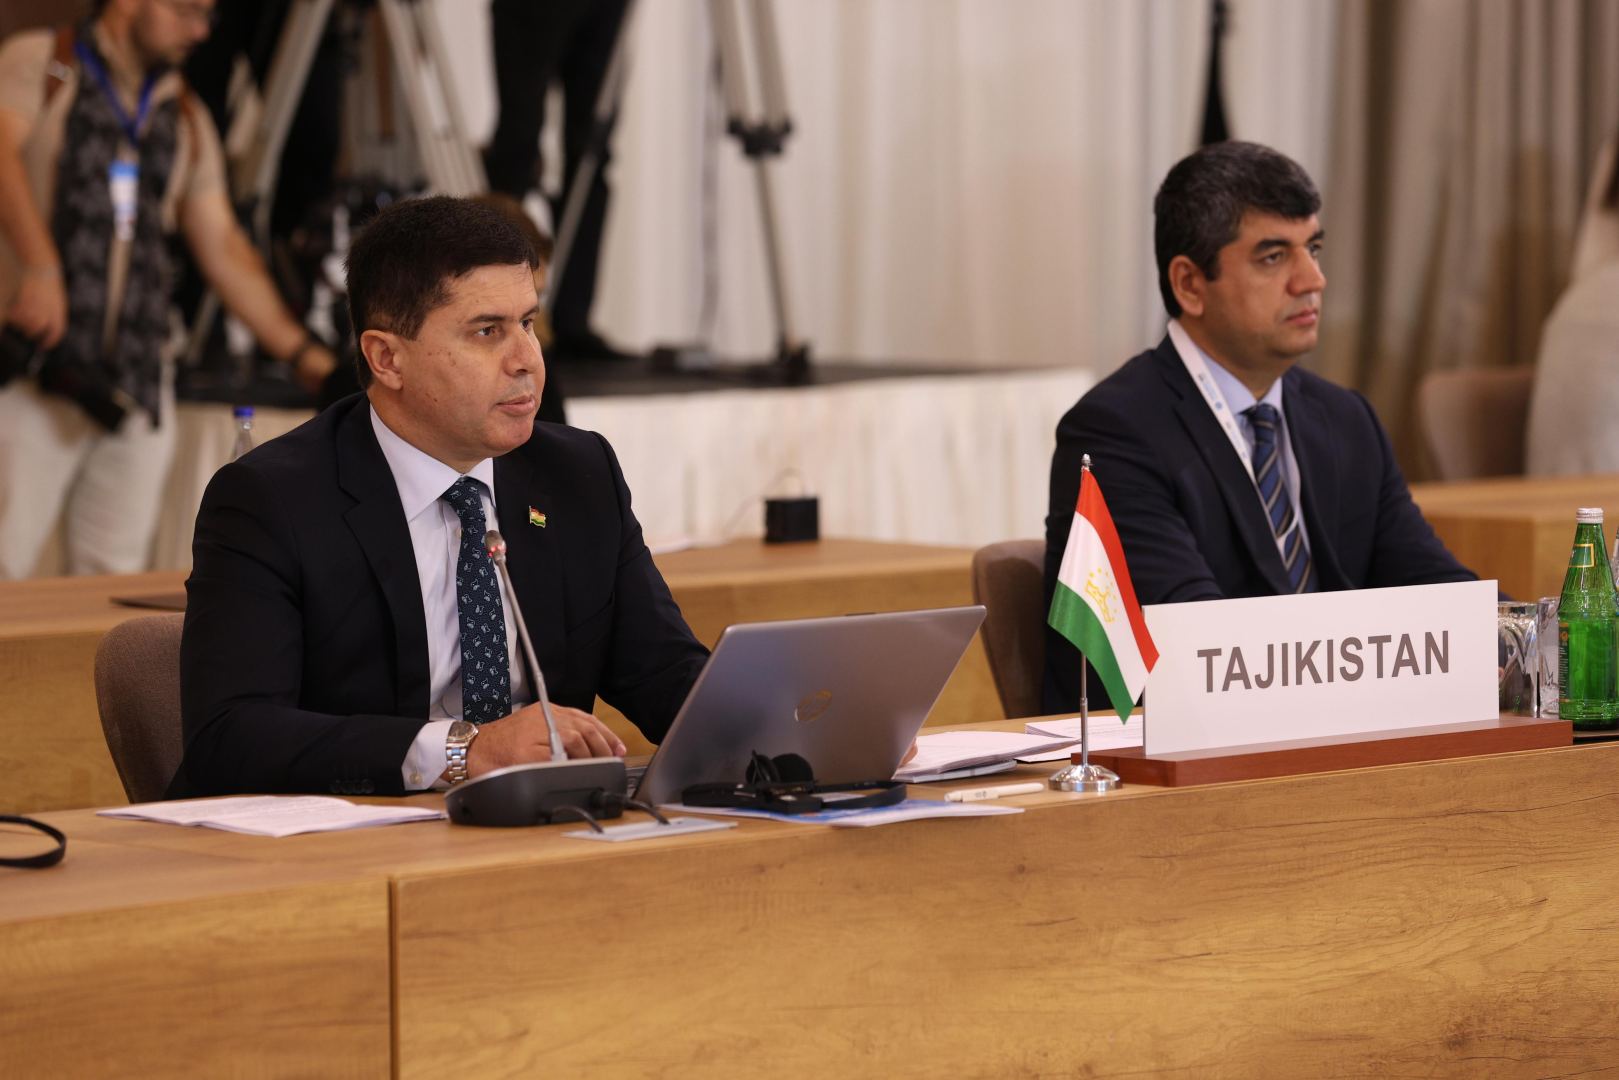 Joining SPECA countries to int'l transport corridors to be timely measure - Tajik minister